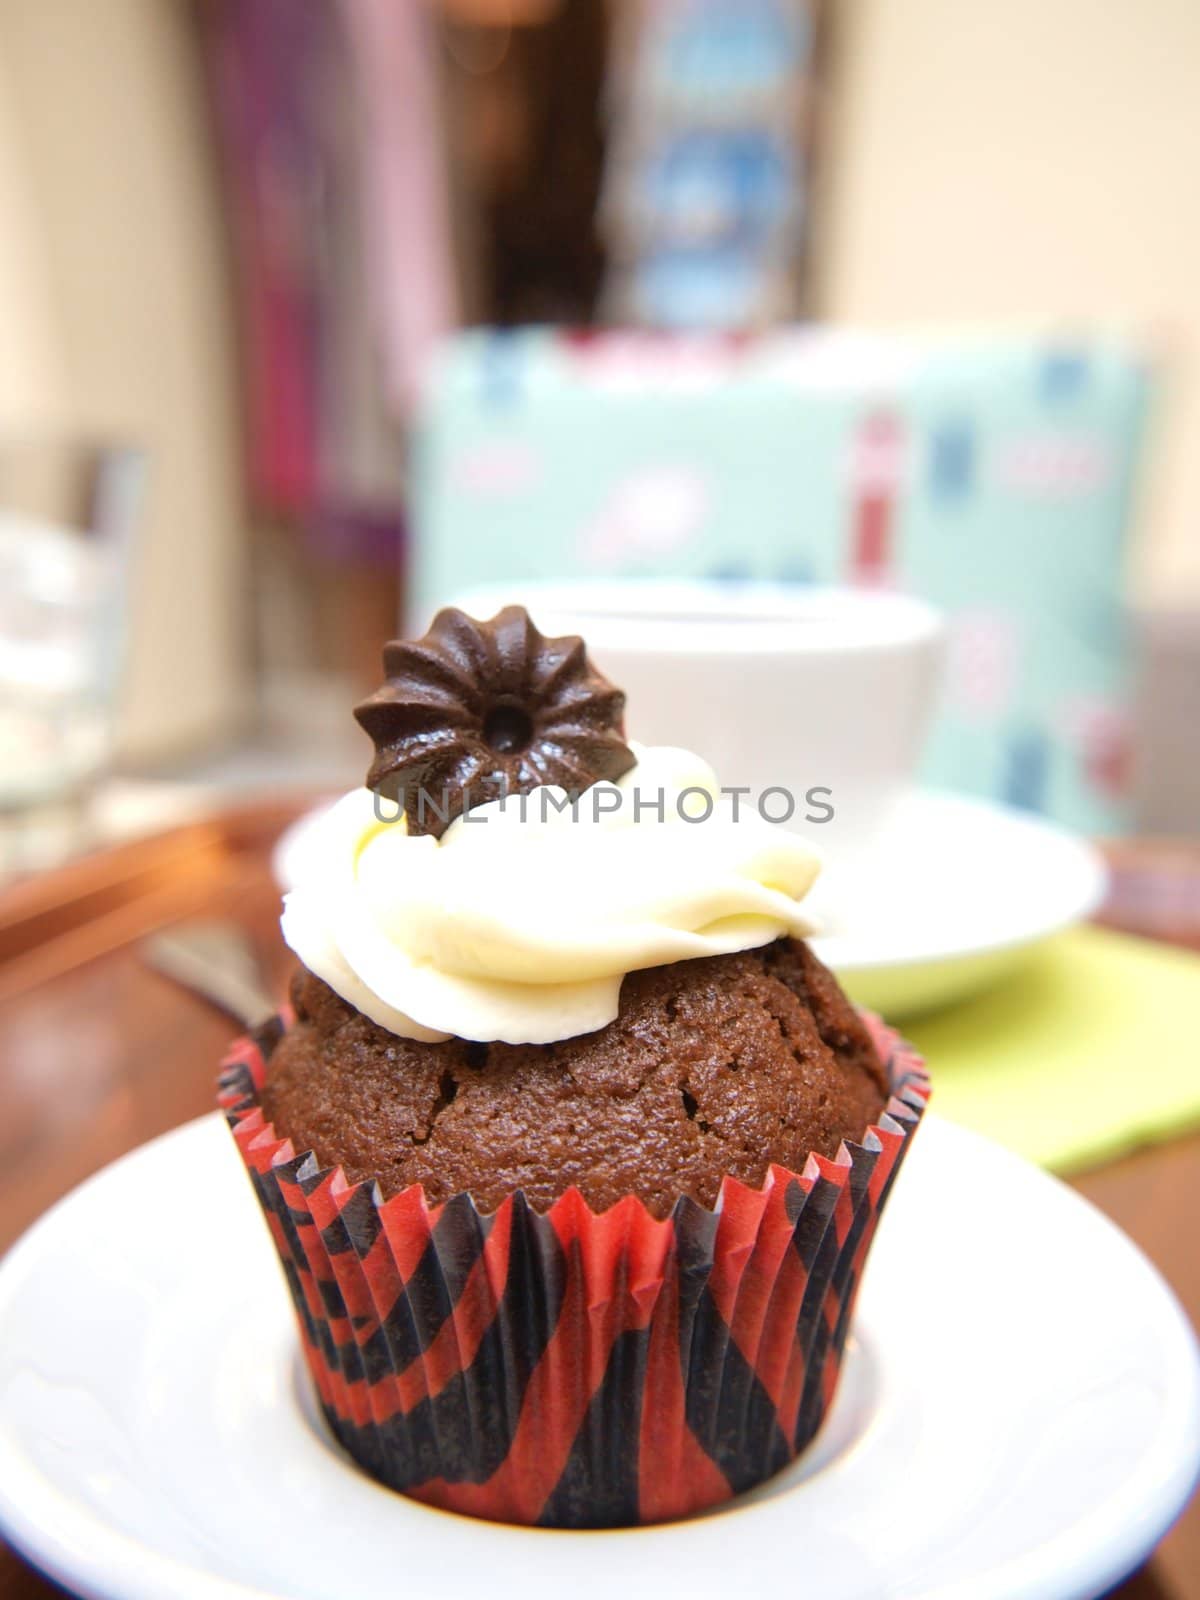 Closeip of chocolate muffin with icing, on plate by Arvebettum